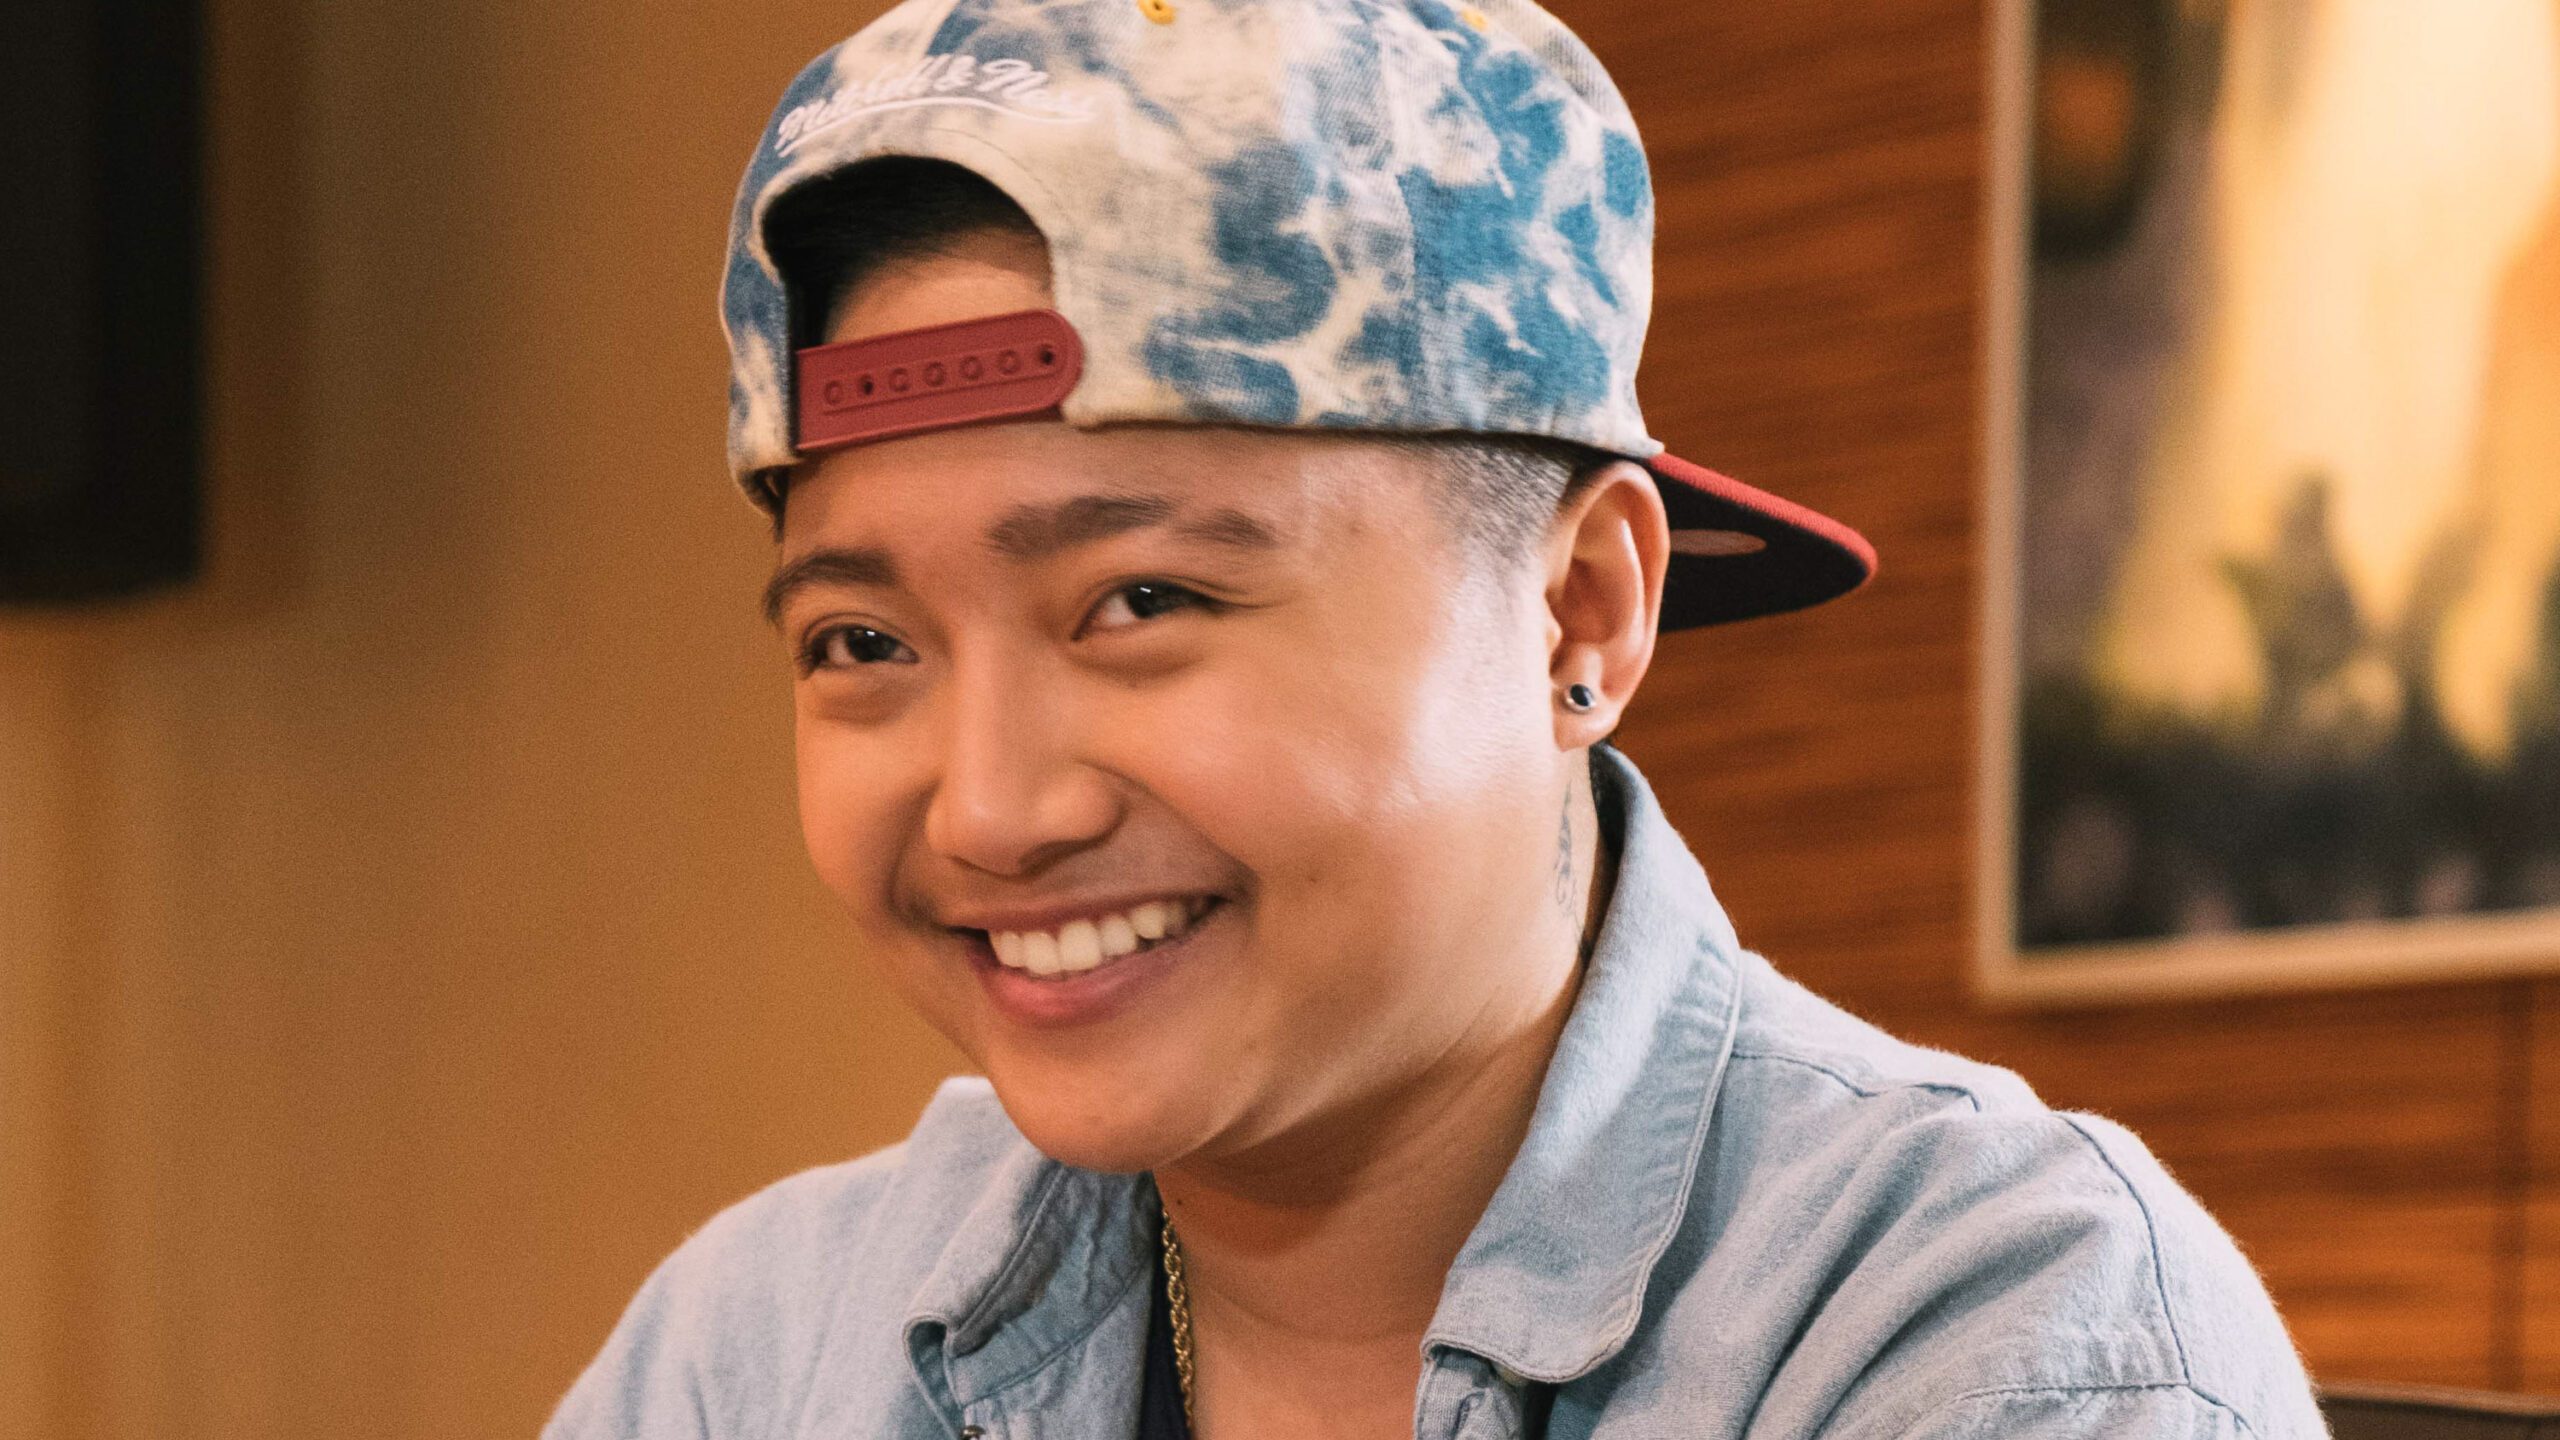 Jake Zyrus opens up on coming out, transitioning